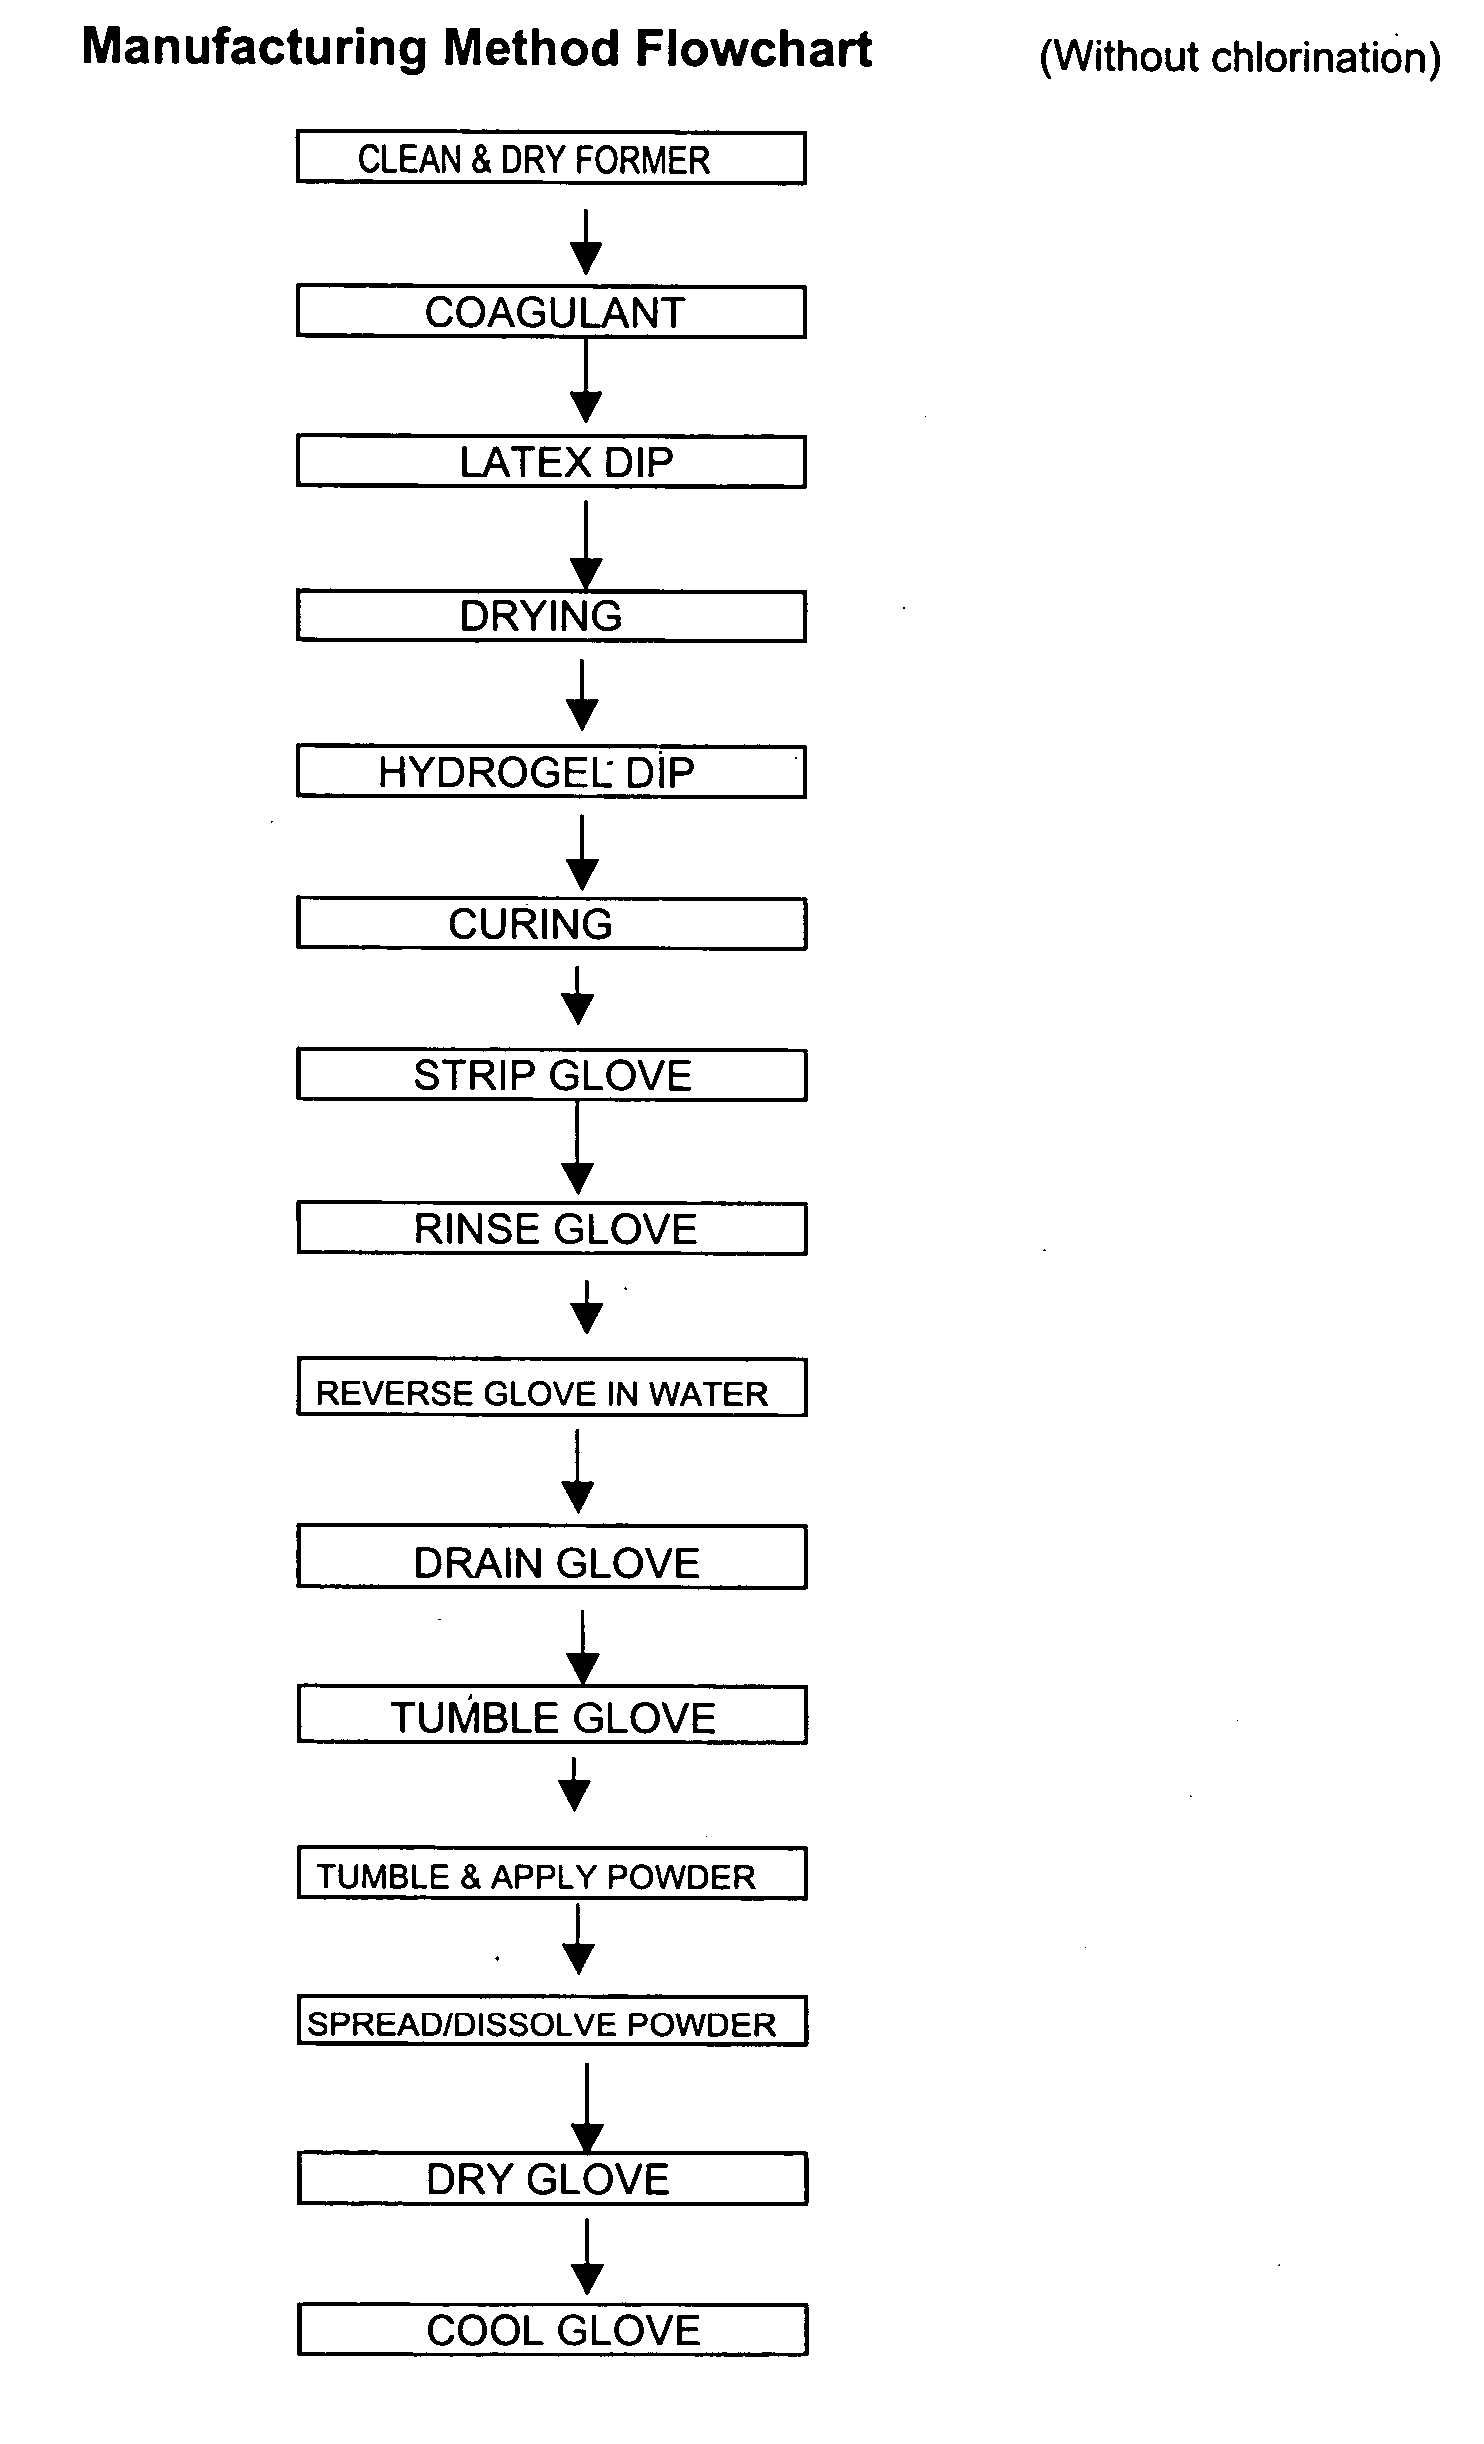 Skin-care protective gloves and manufacturing method